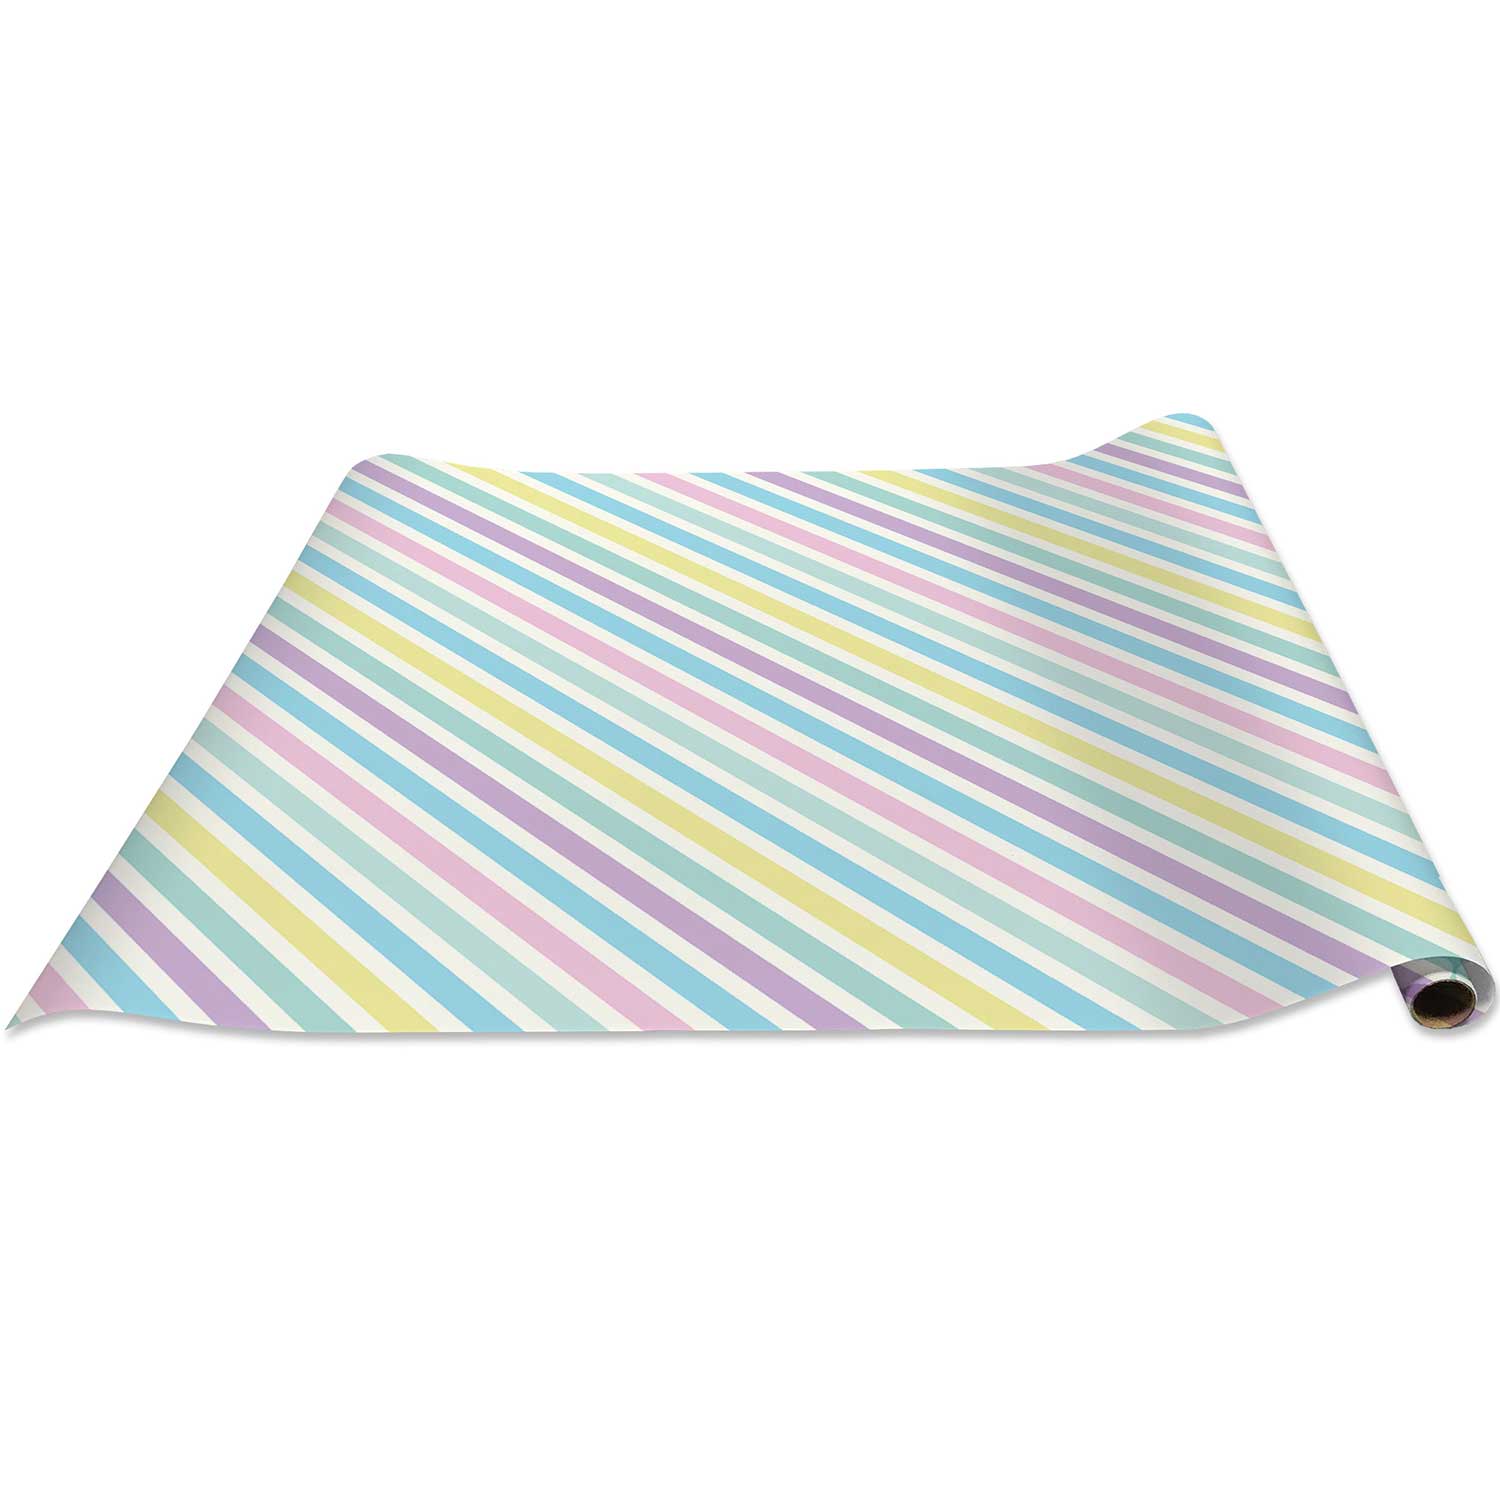 Pastel Stripe Baby Gift Wrap by Present Paper Full Ream 833 ft x 24 in